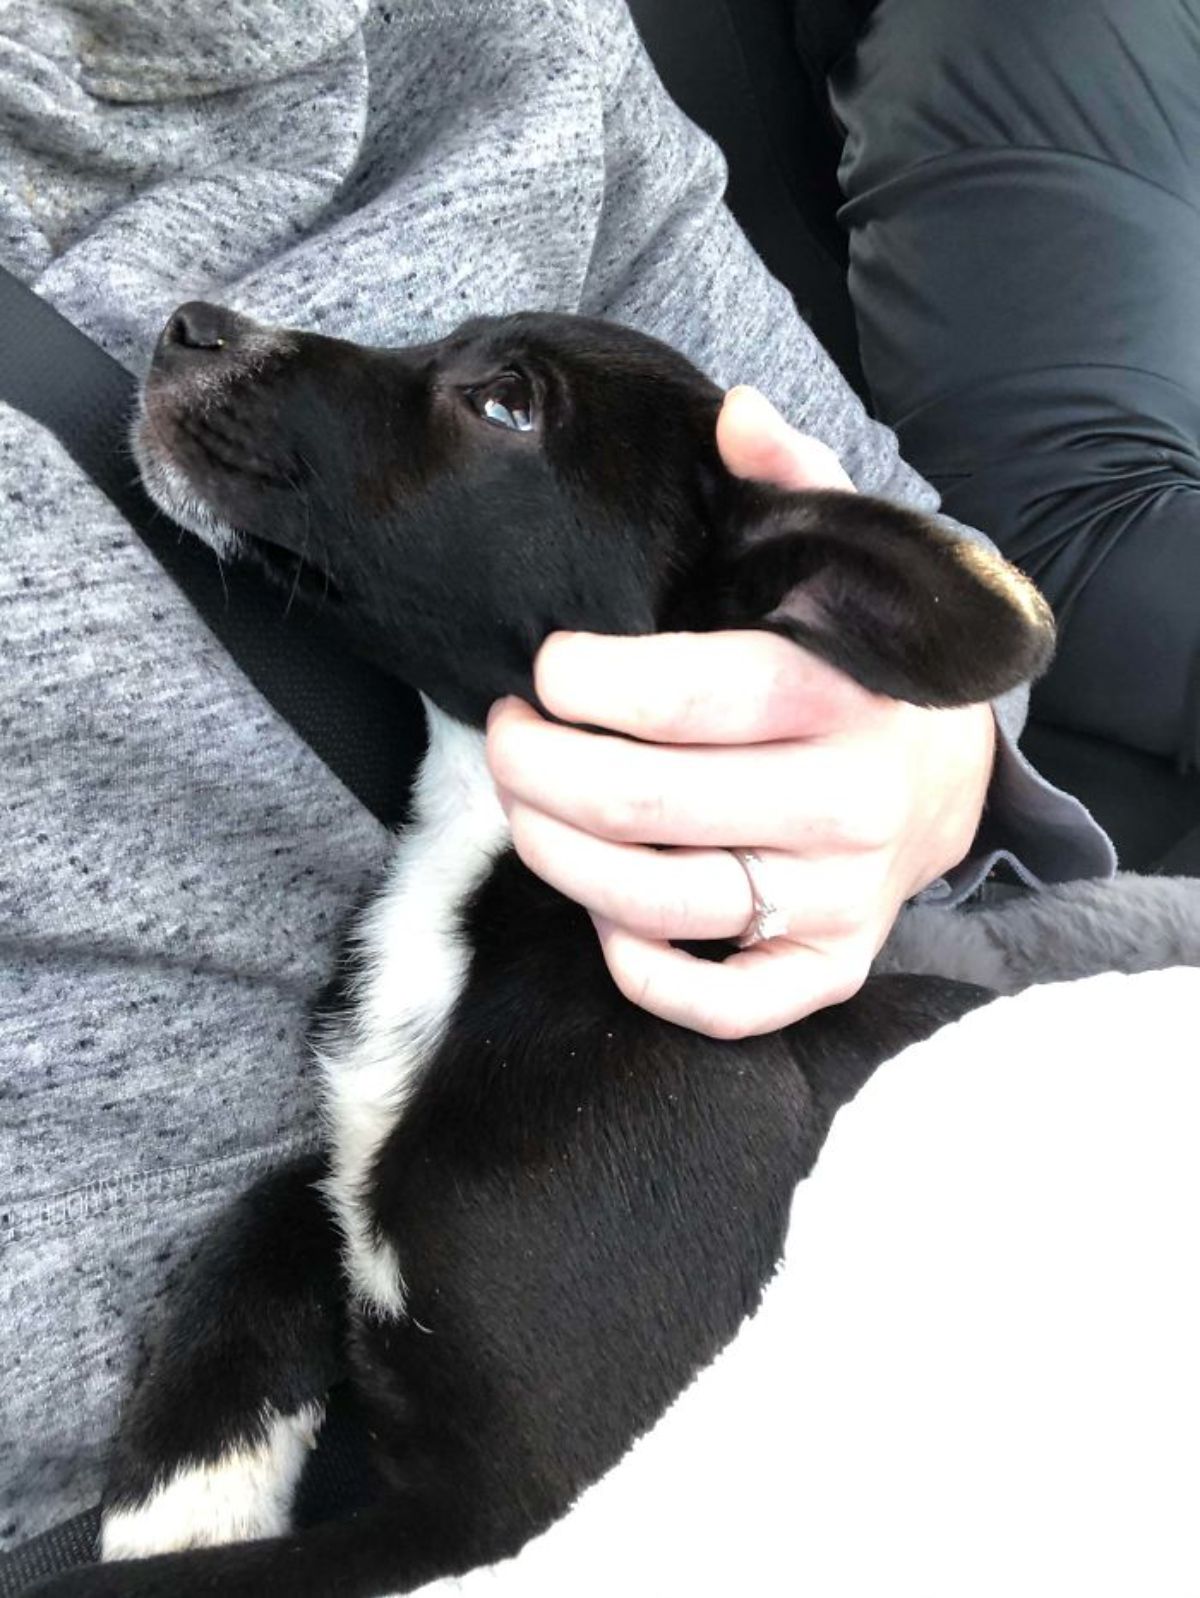 black and white puppy on someone's lap in a car and looking up at the person